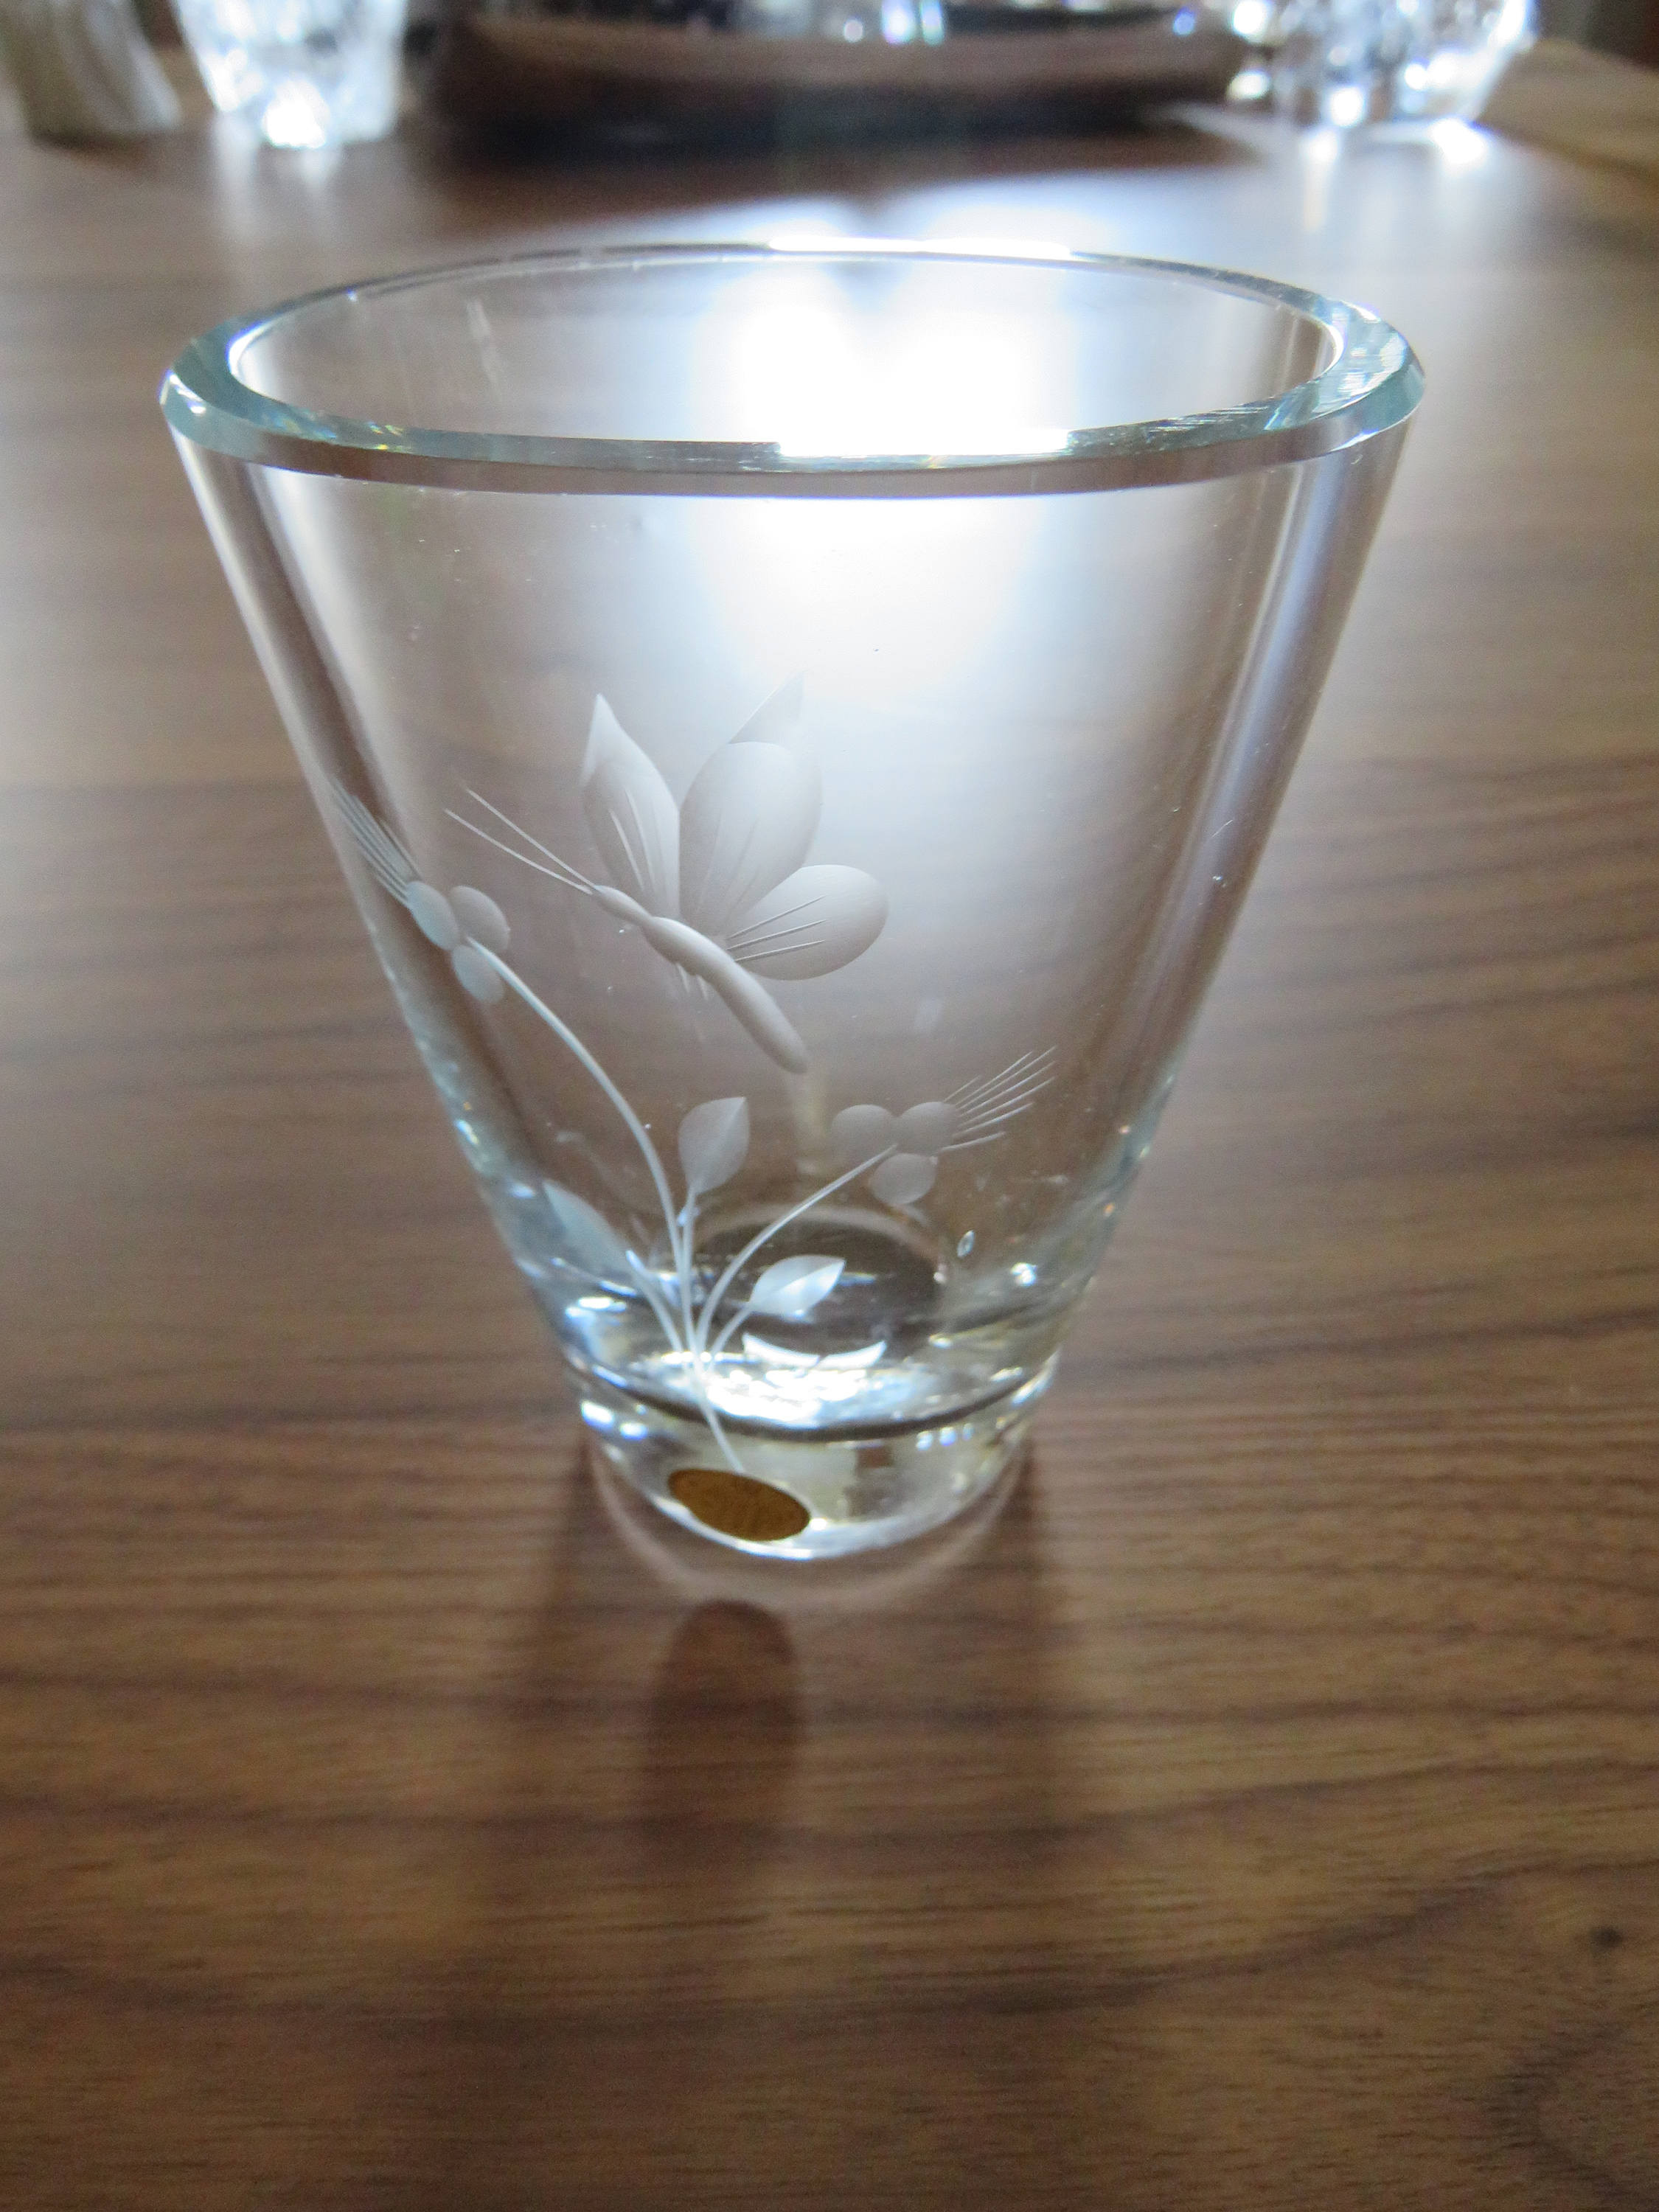 kosta boda vase of small kosta crystal etched butterfly thistle flower vase etsy intended for dzoom